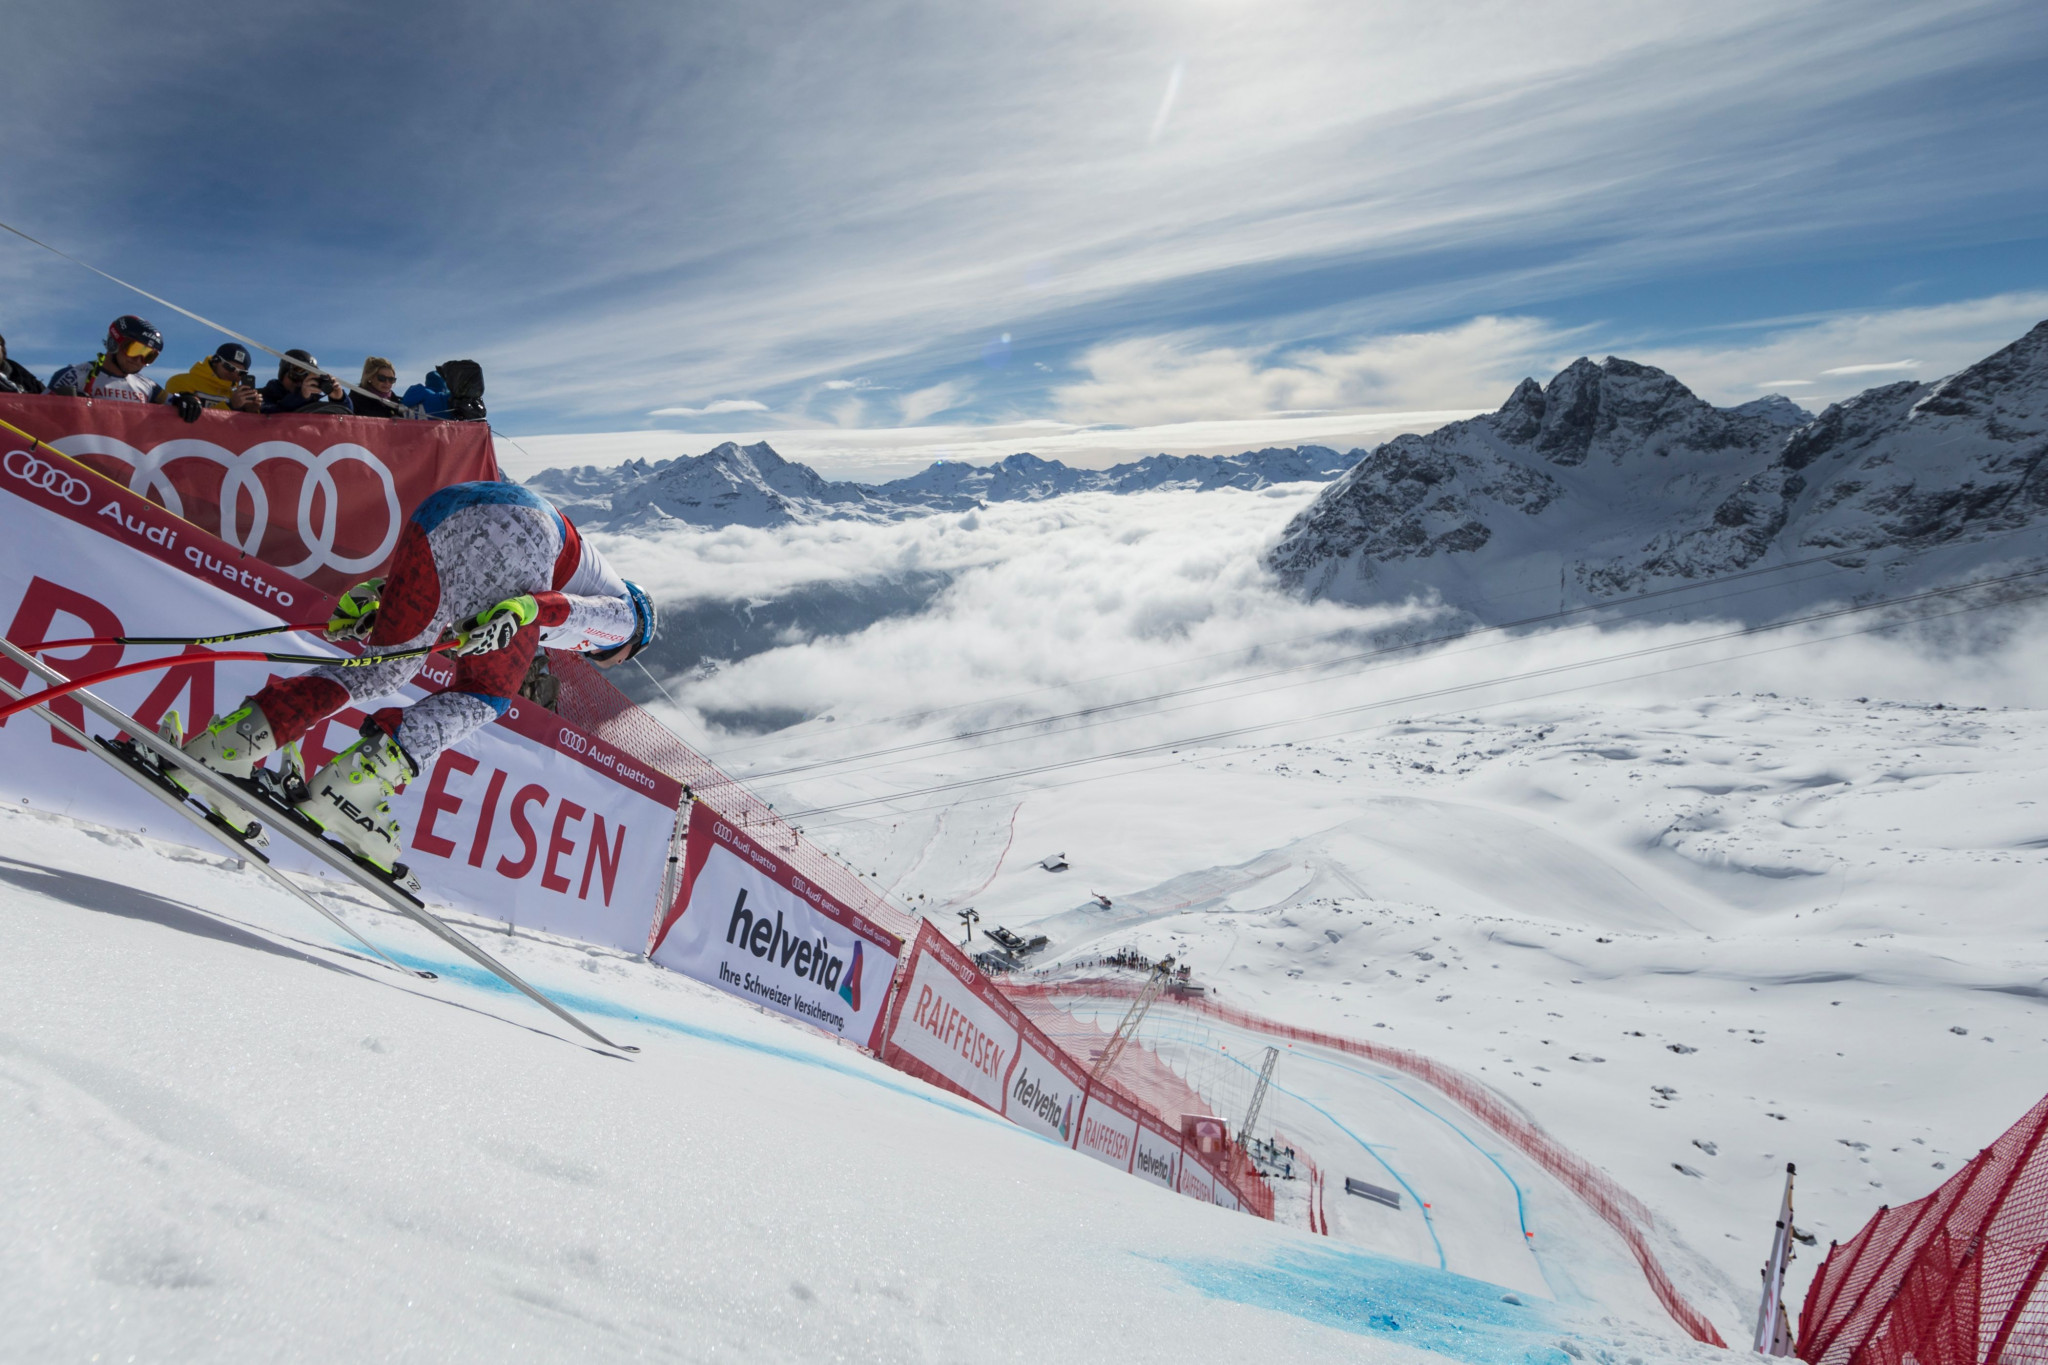 Engadine is set to host the 2025 FIS Freestyle Ski, Snowboard and Freeski World Championships ©Getty Images